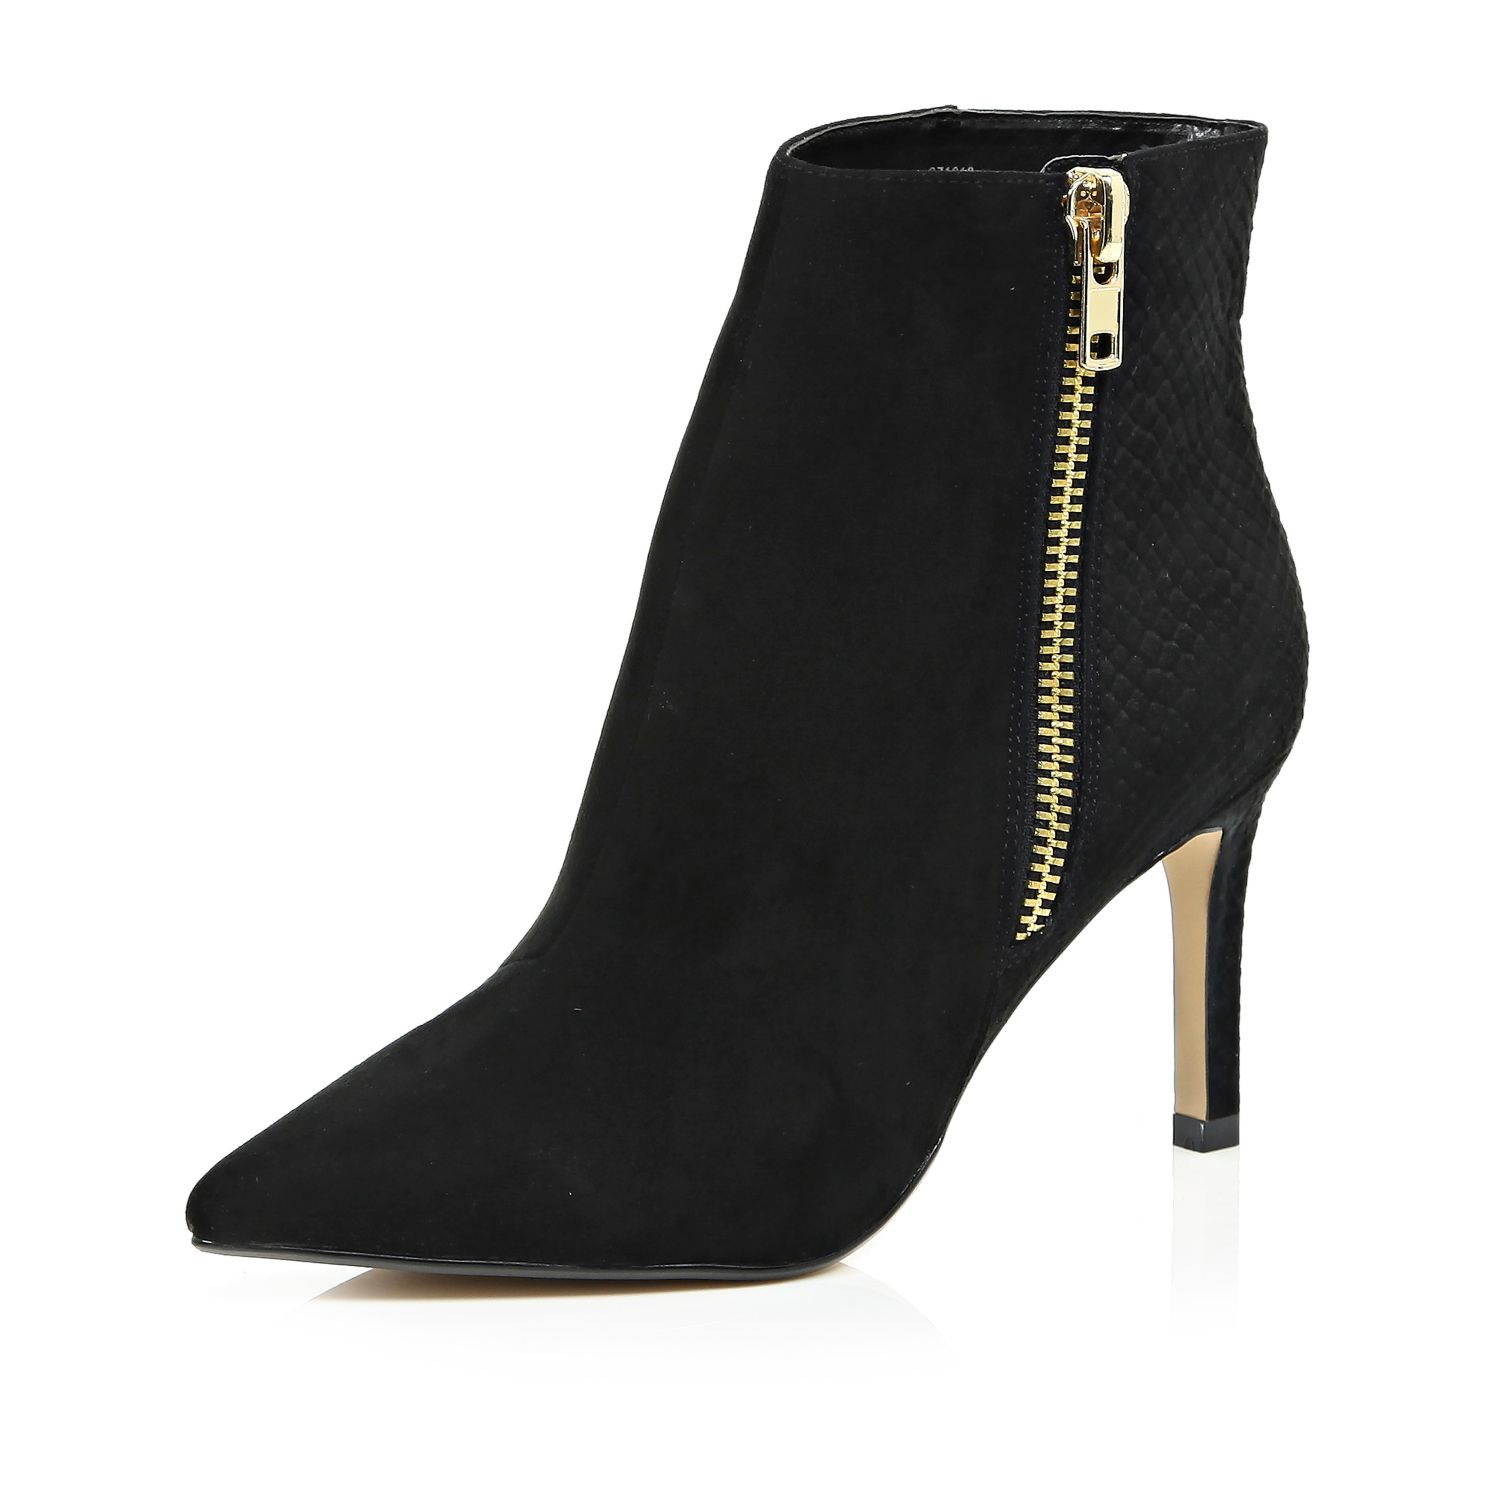 River island Black Pointed Toe Zip Trim Heeled Ankle Boots in Black | Lyst